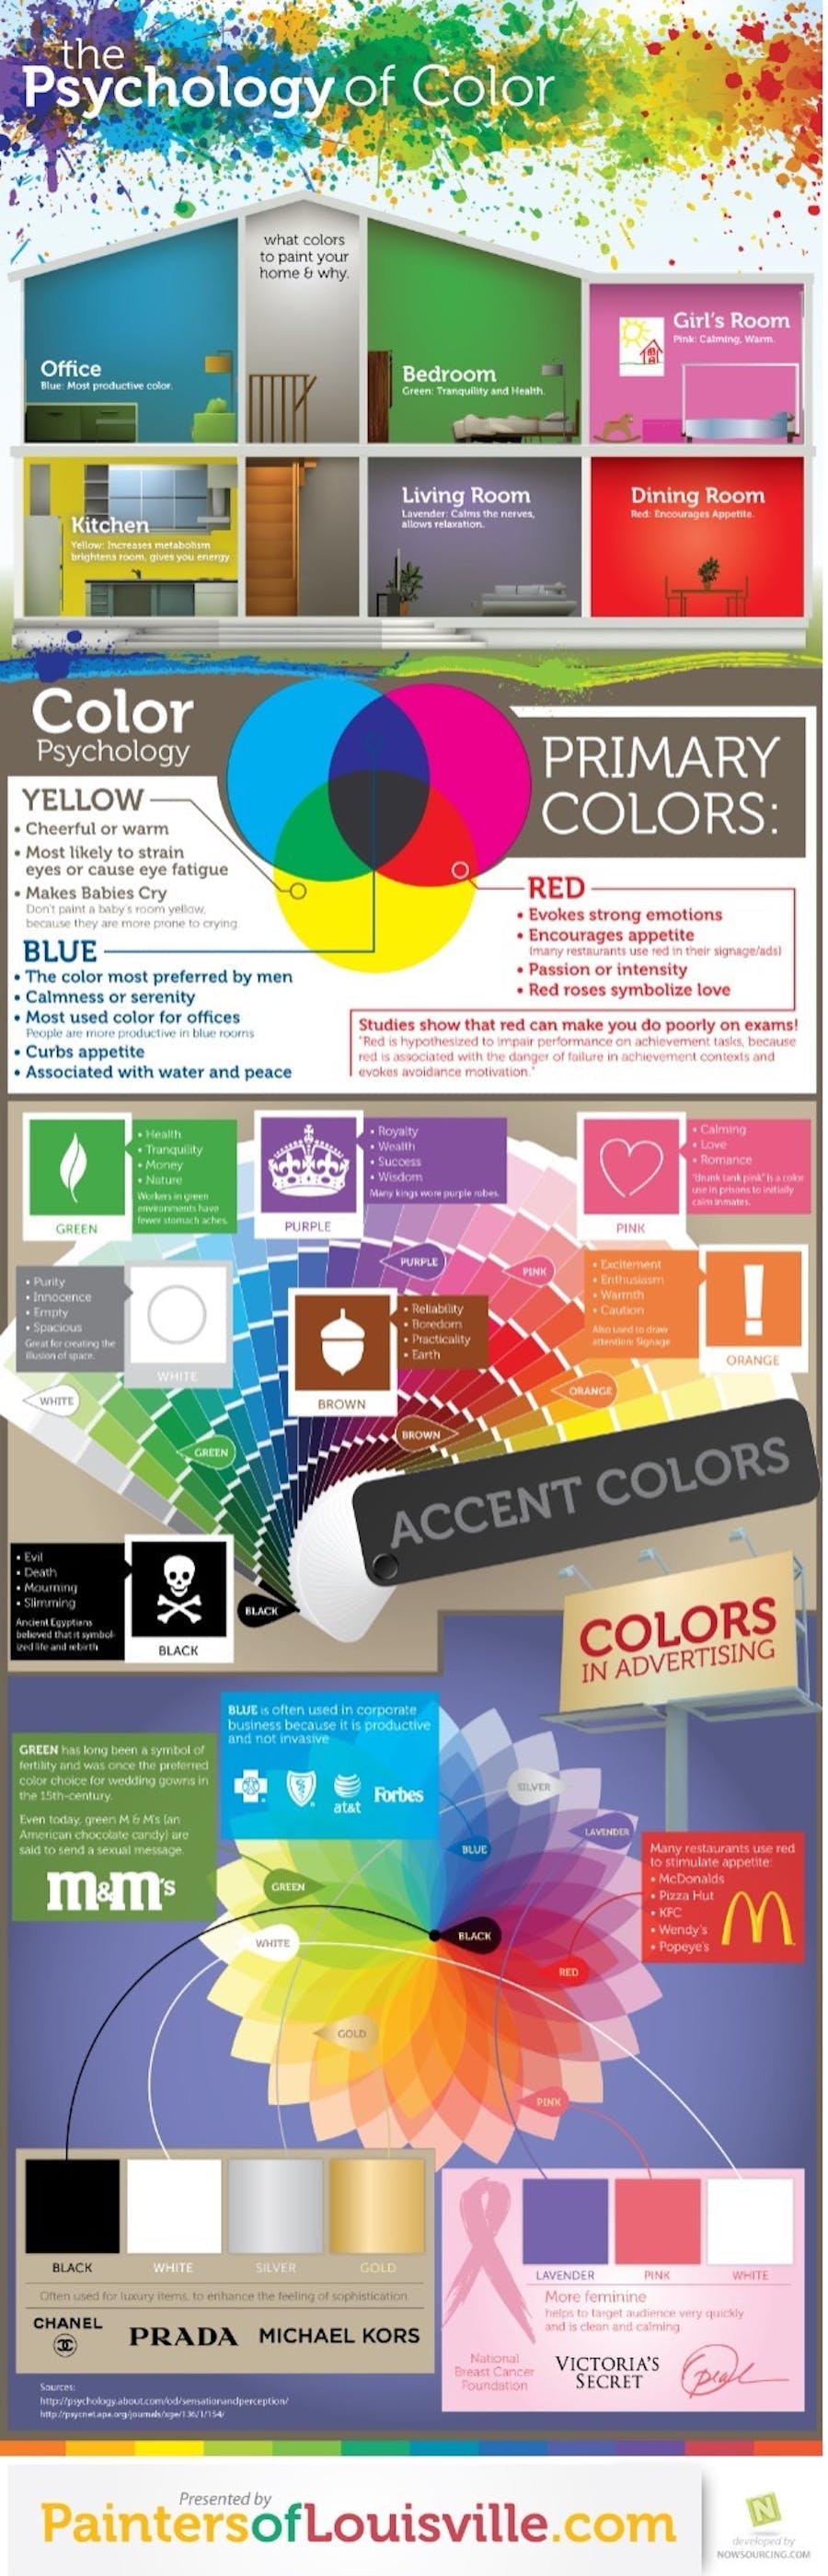 Psychology of color infographic.